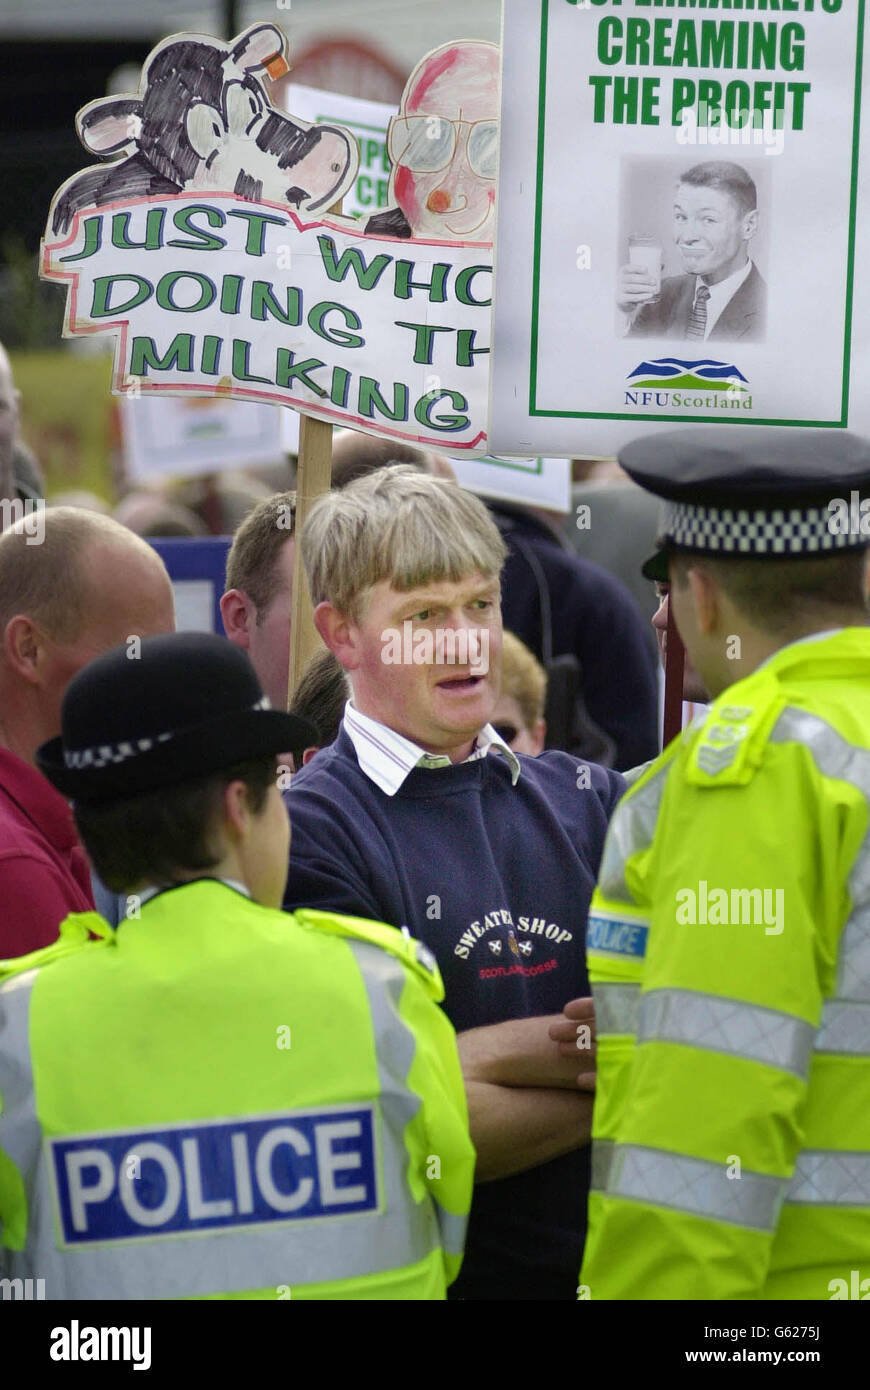 Dairy farmers protest at Asda Lorry Depot Stock Photo